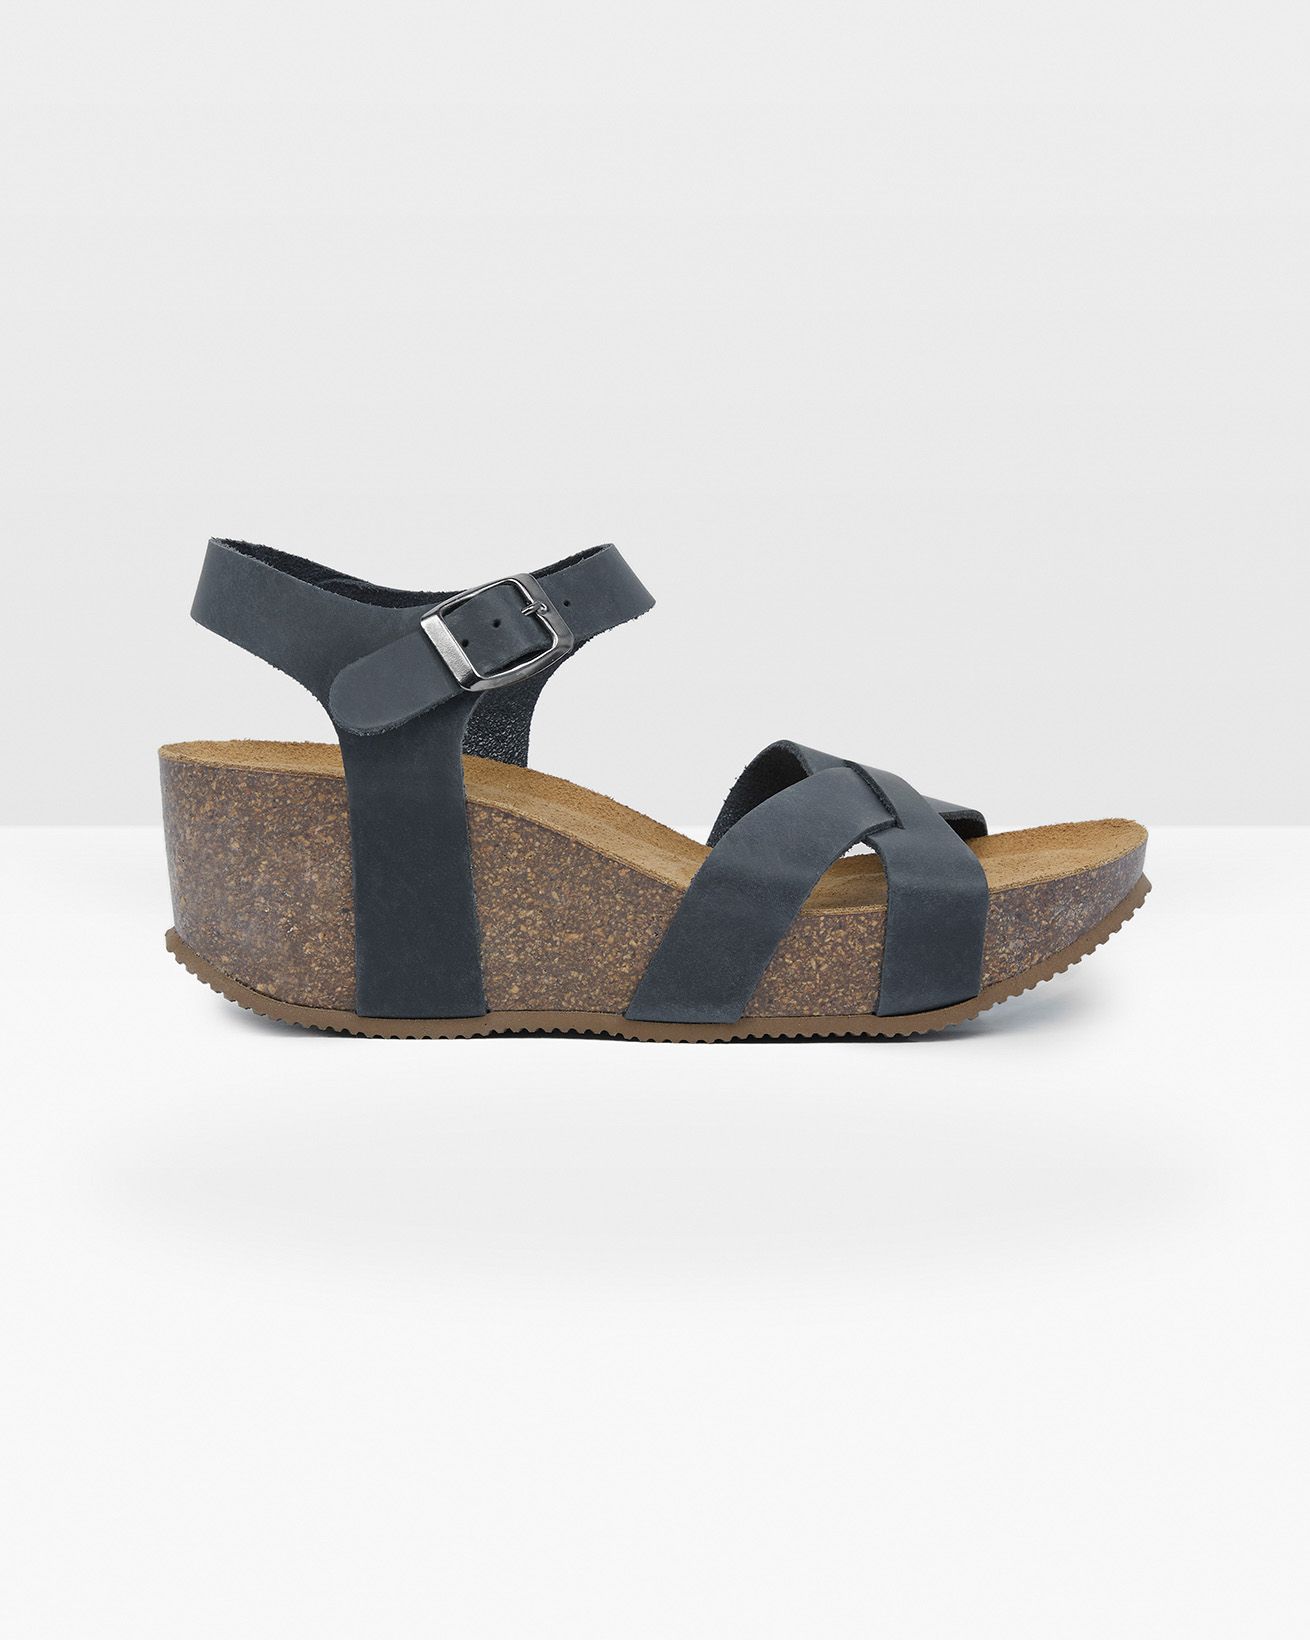 Crossover Wedge Sandals